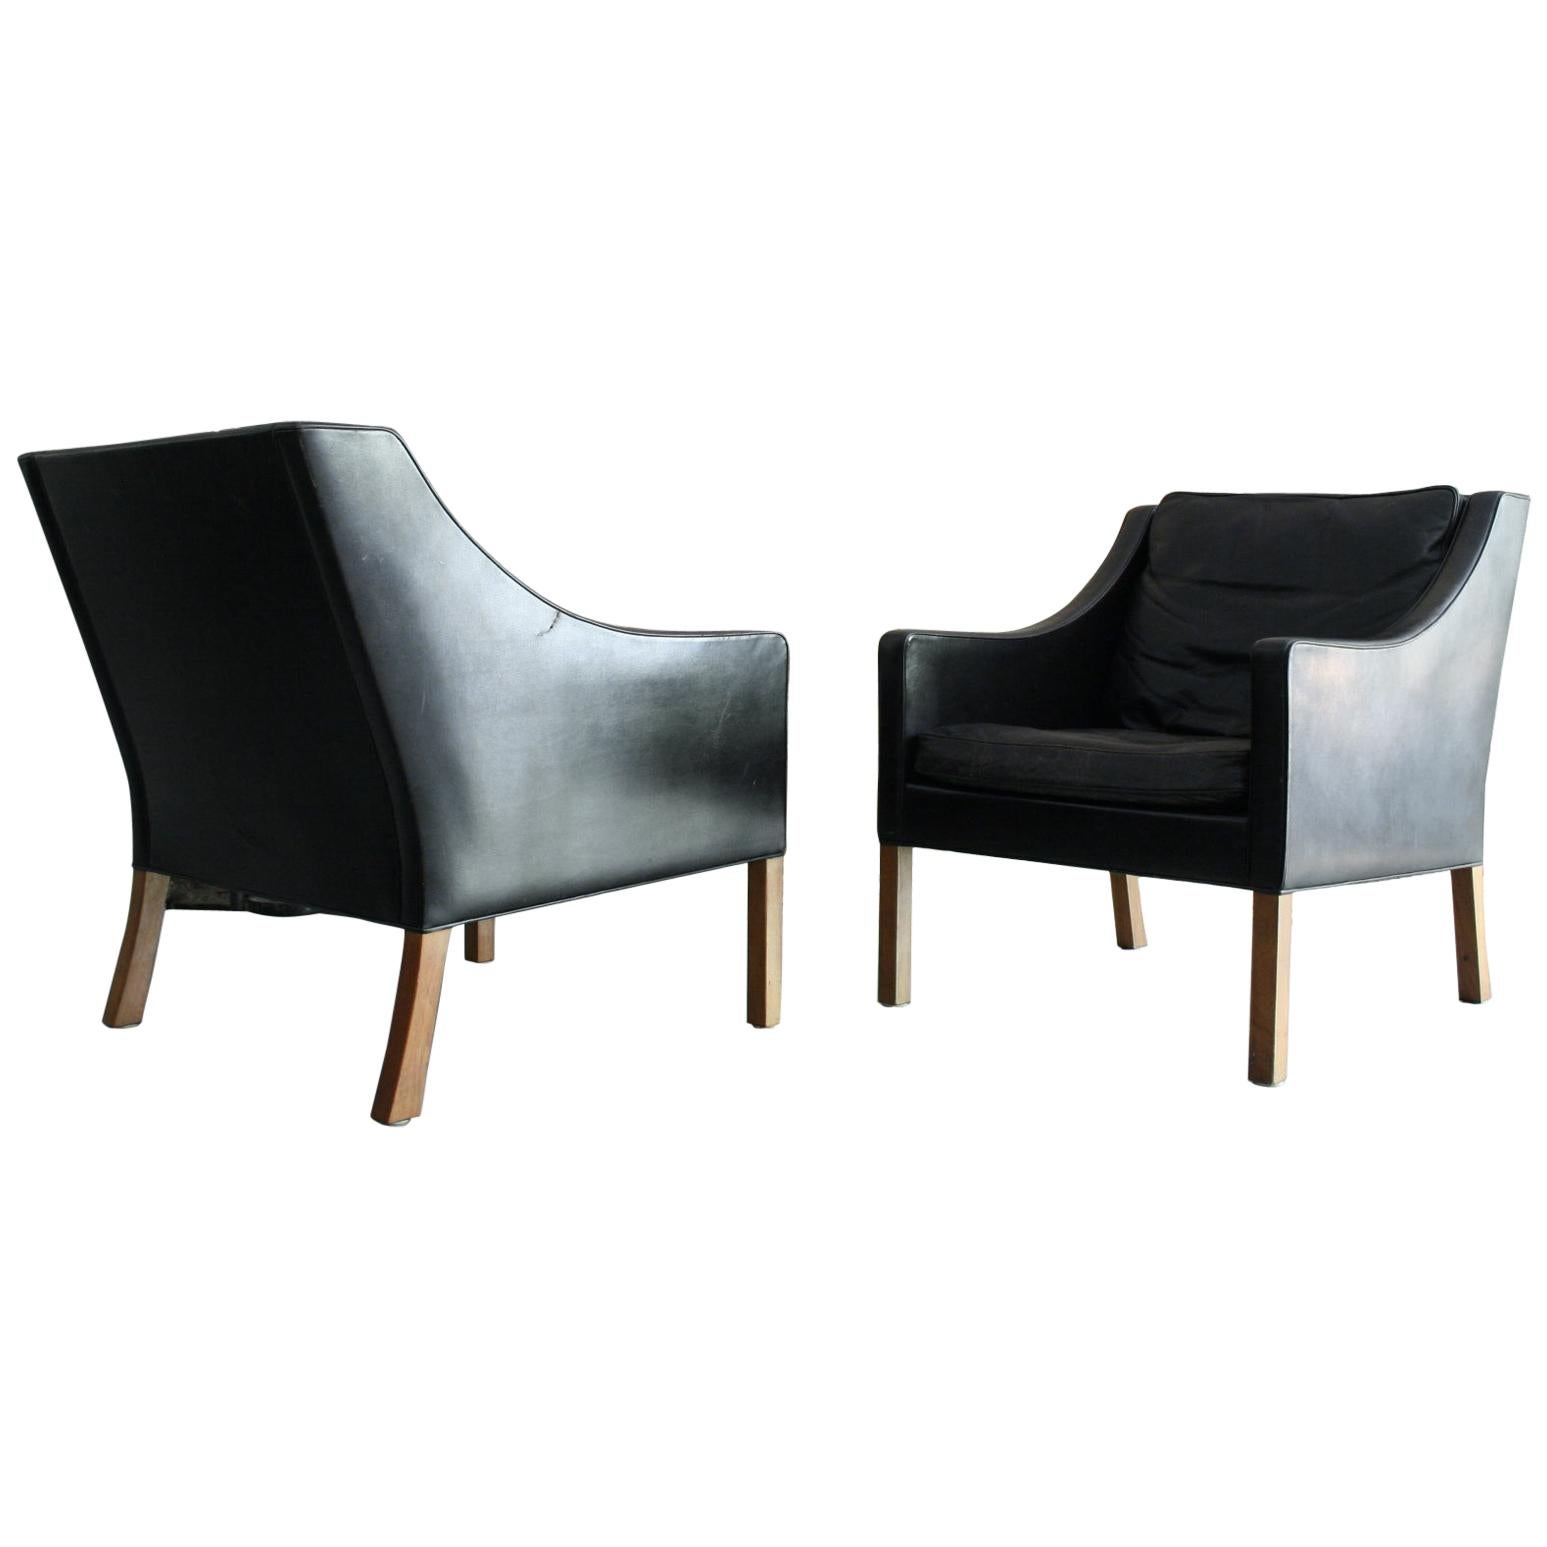 Matched Pair of Børge Mogensen Model #2207 Leather Lounge Chairs